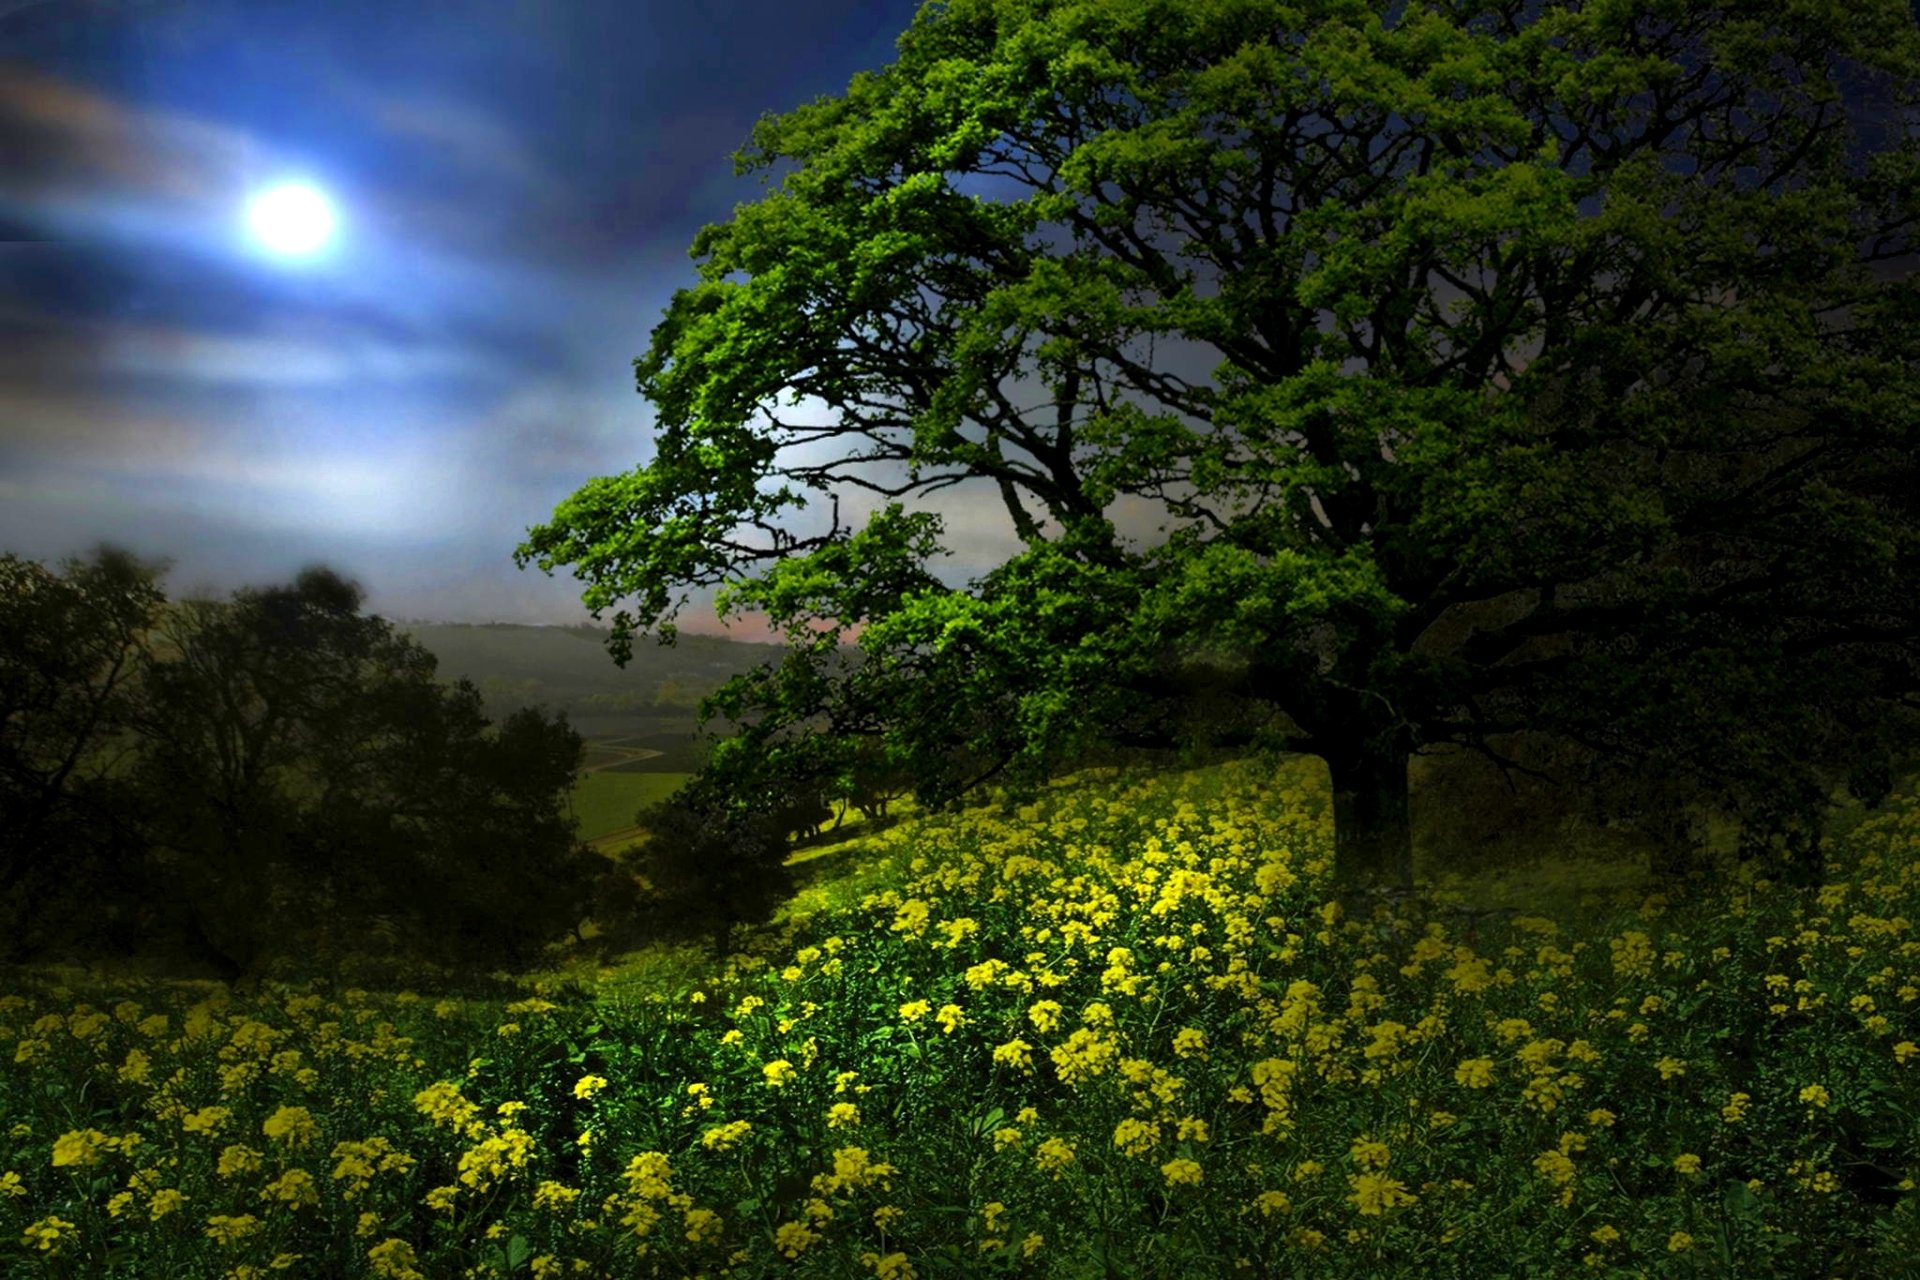 Night in Spring Meadow HD Wallpaper | Background Image | 2048x1365 | ID